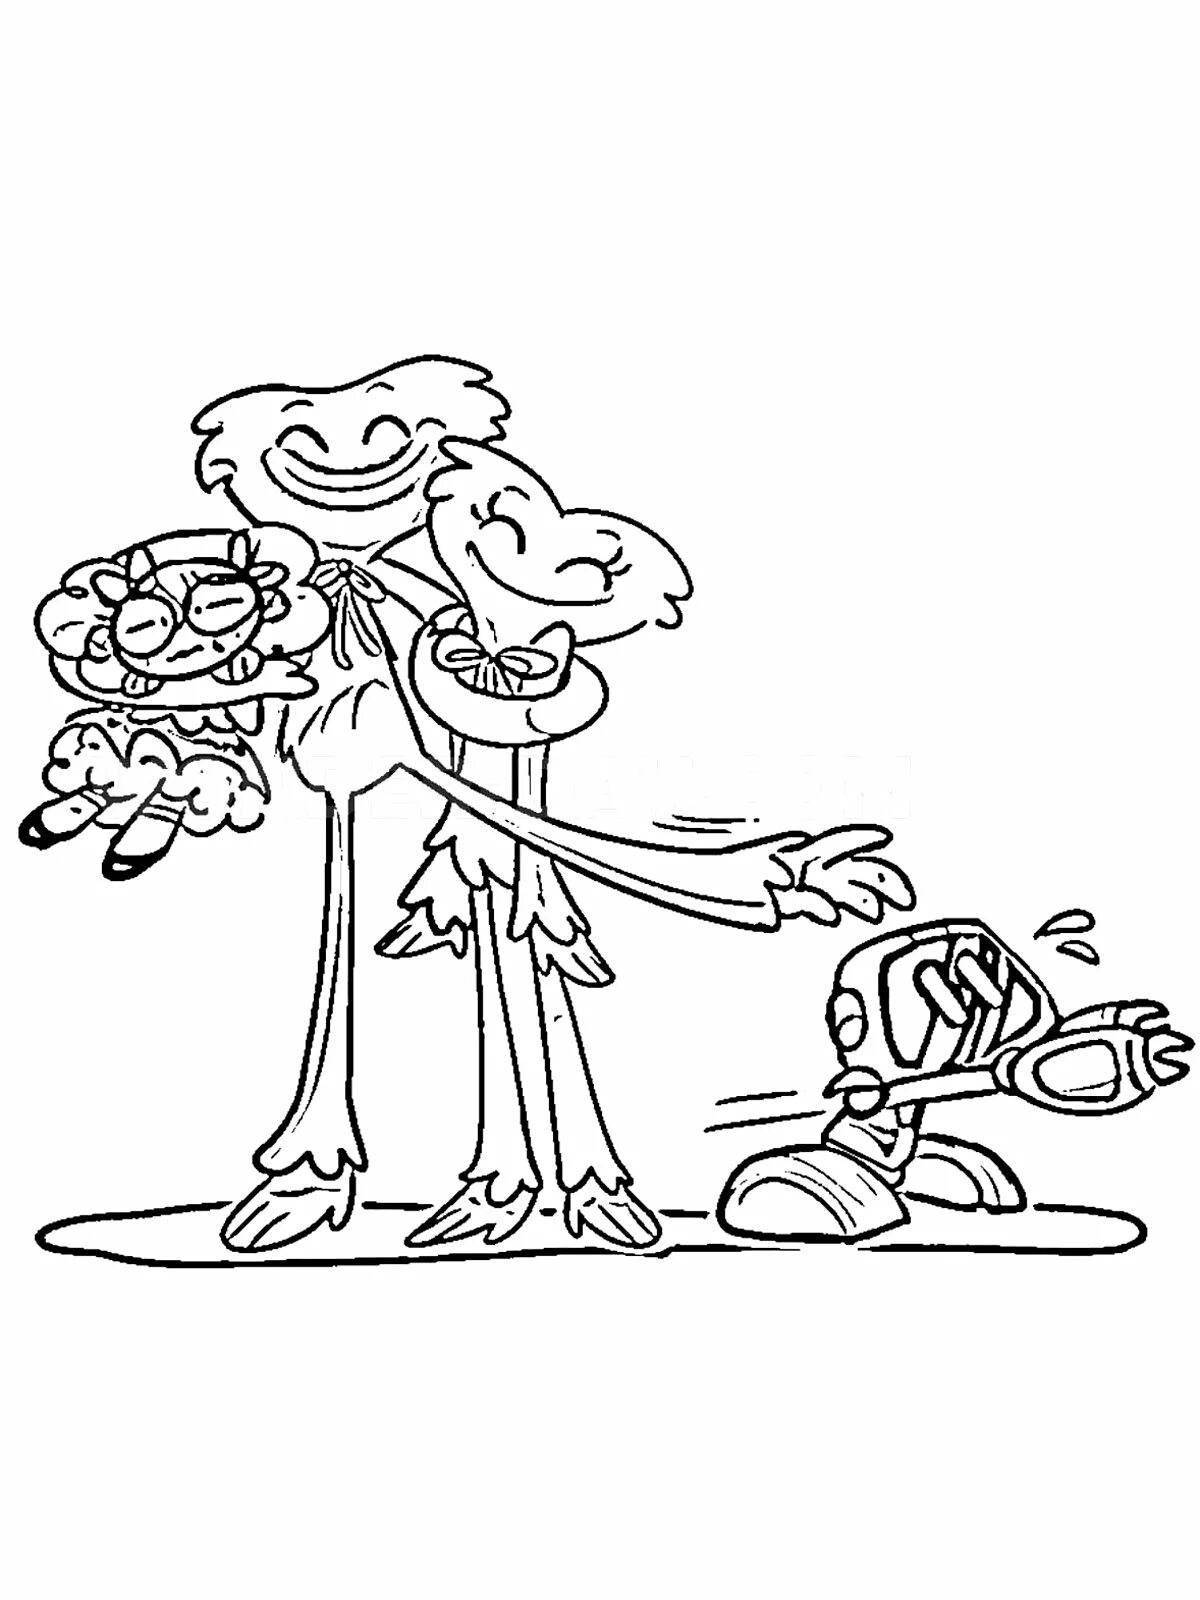 Coloring page nice mommy with long legs